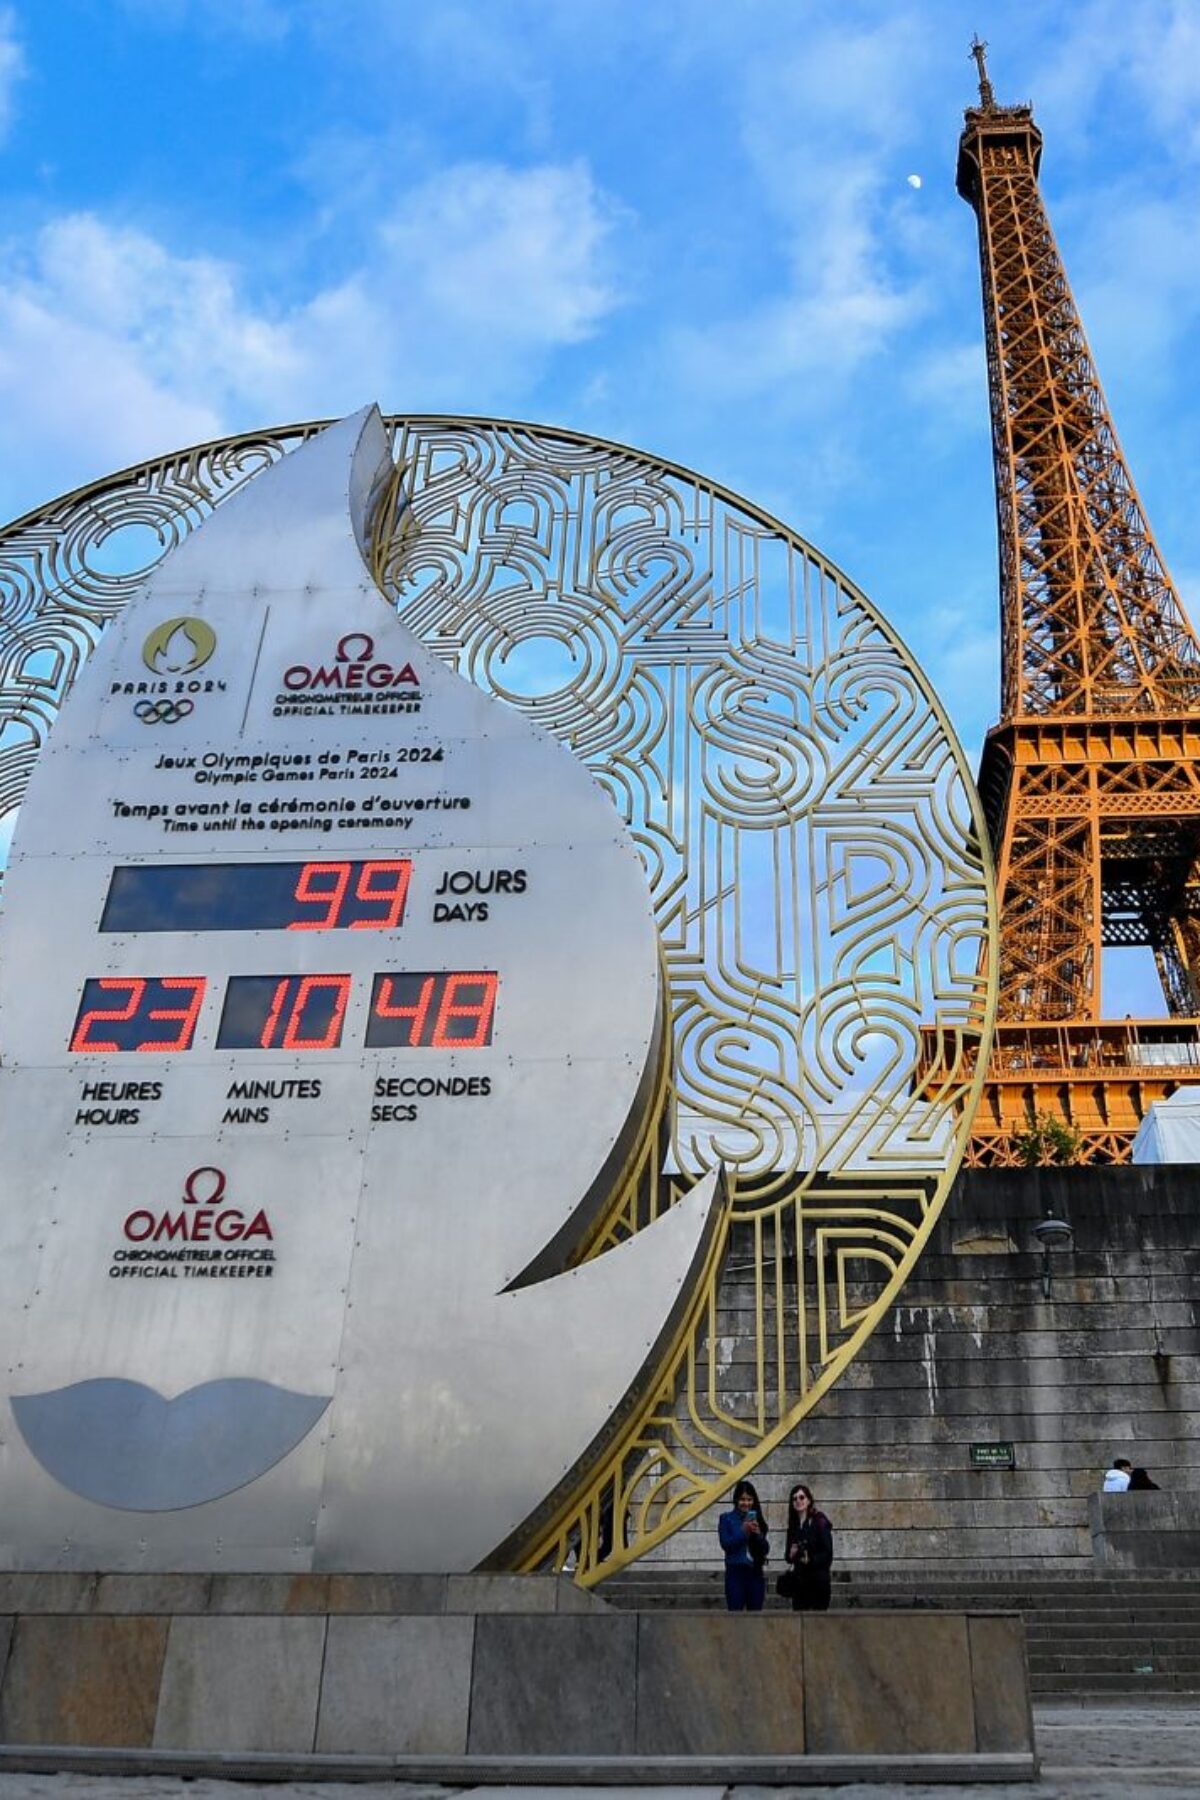 PARIS, FRANCE - APRIL 17: The official Omega Olympic countdown clock located beside the River Seine displays the remaining days until the Opening Ceremony of the Paris 2024 Olympic Games on April 17, 2024 in Paris, France. Paris will host the Summer Olympics from July 26 till August 11, 2024.(Photo by Franco Arland/Getty Images)